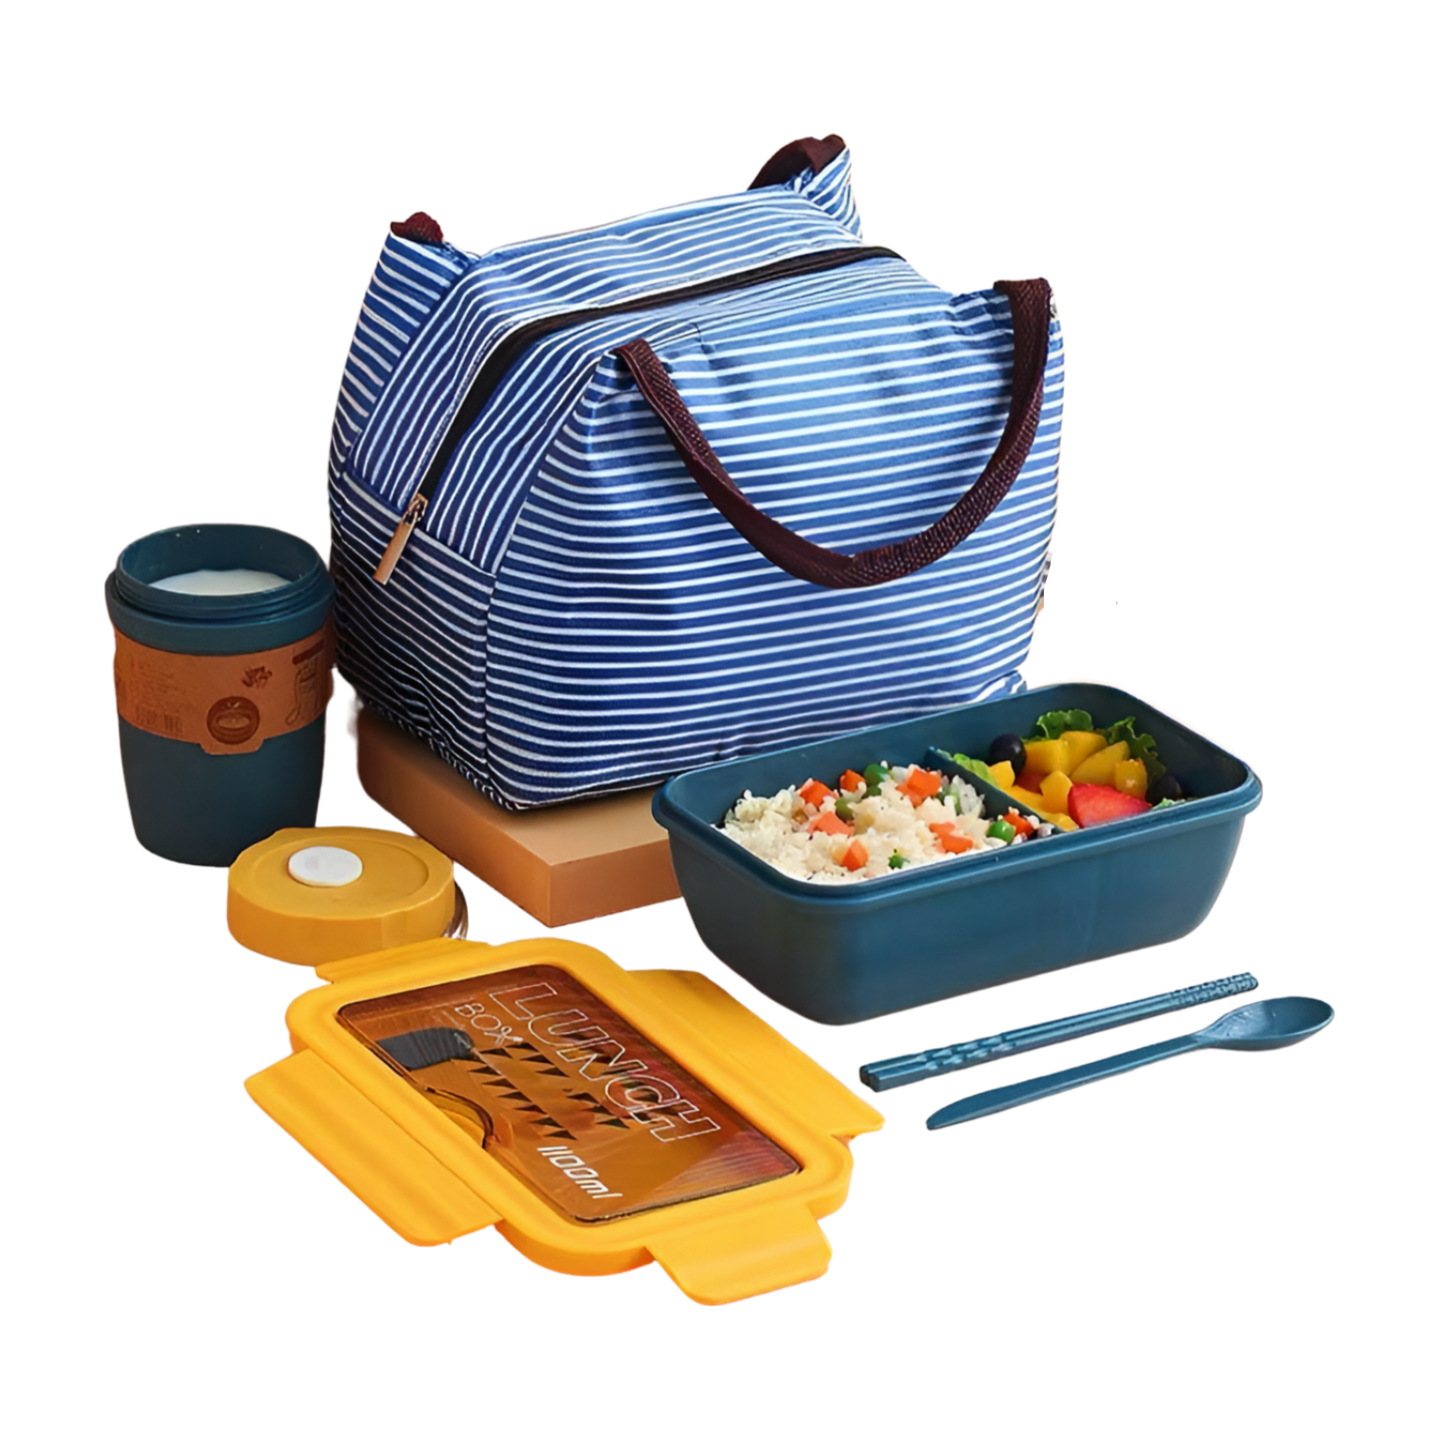 https://allabundantthings.com/cdn/shop/files/ESlENew_Microwave_Lunch_Box_withBento_Compartments_Portable_Box_Japanese_Style_Leakproof_Food_Container_for_Kids_with.png?v=1686621917&width=1920